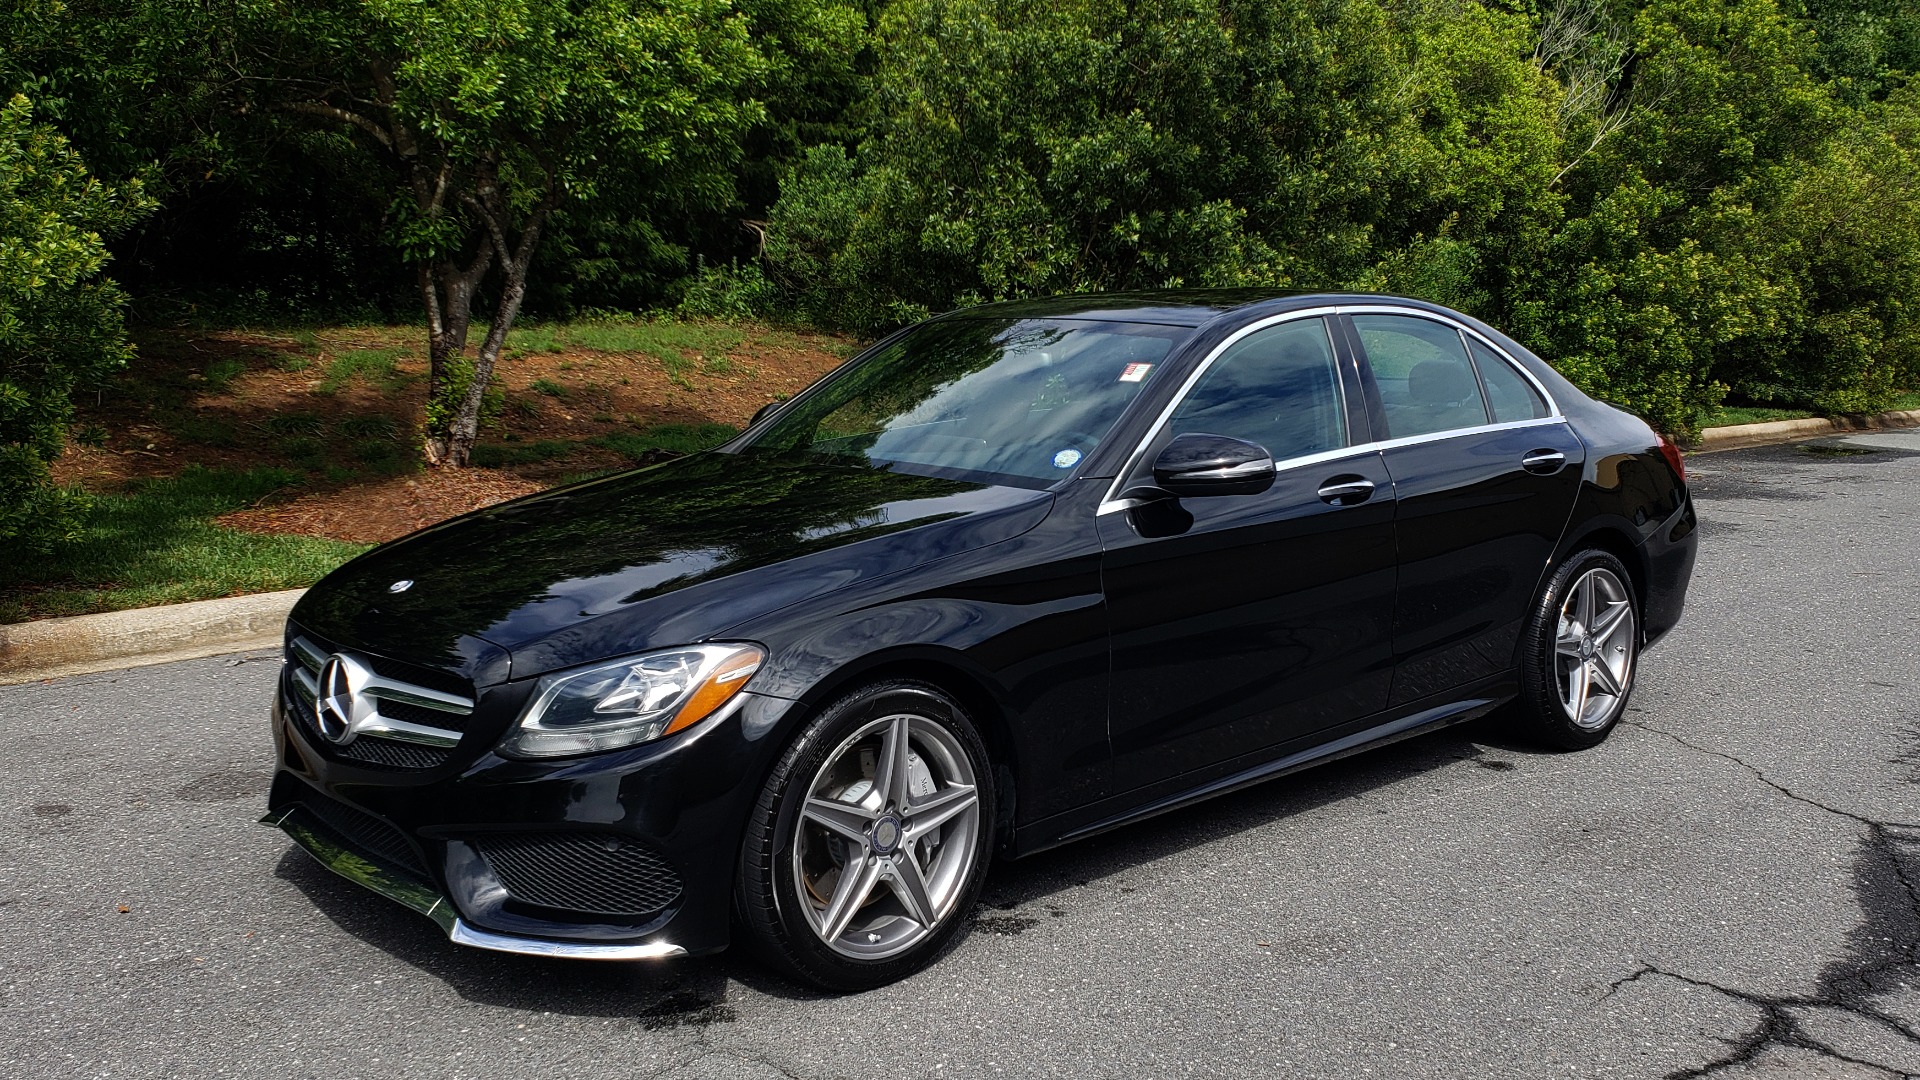 Used 2016 Mercedes-Benz C-CLASS C300 SPORT / PREM PKG / NAV / PANO-ROOF / REARVIEW / KEYLESS-GO for sale Sold at Formula Imports in Charlotte NC 28227 1